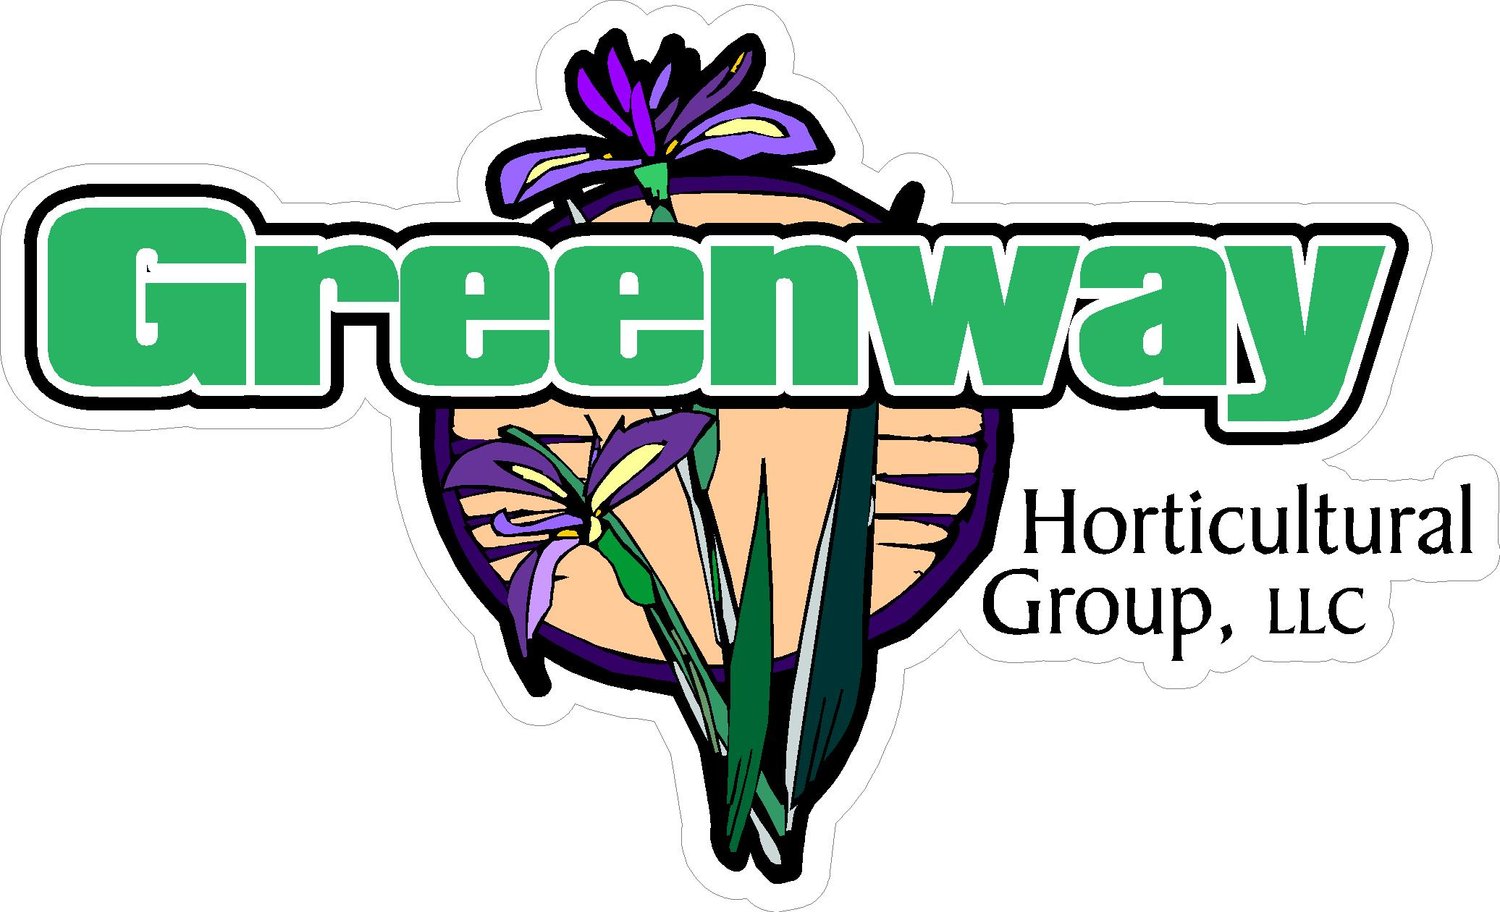 Greenway Horticultural Group